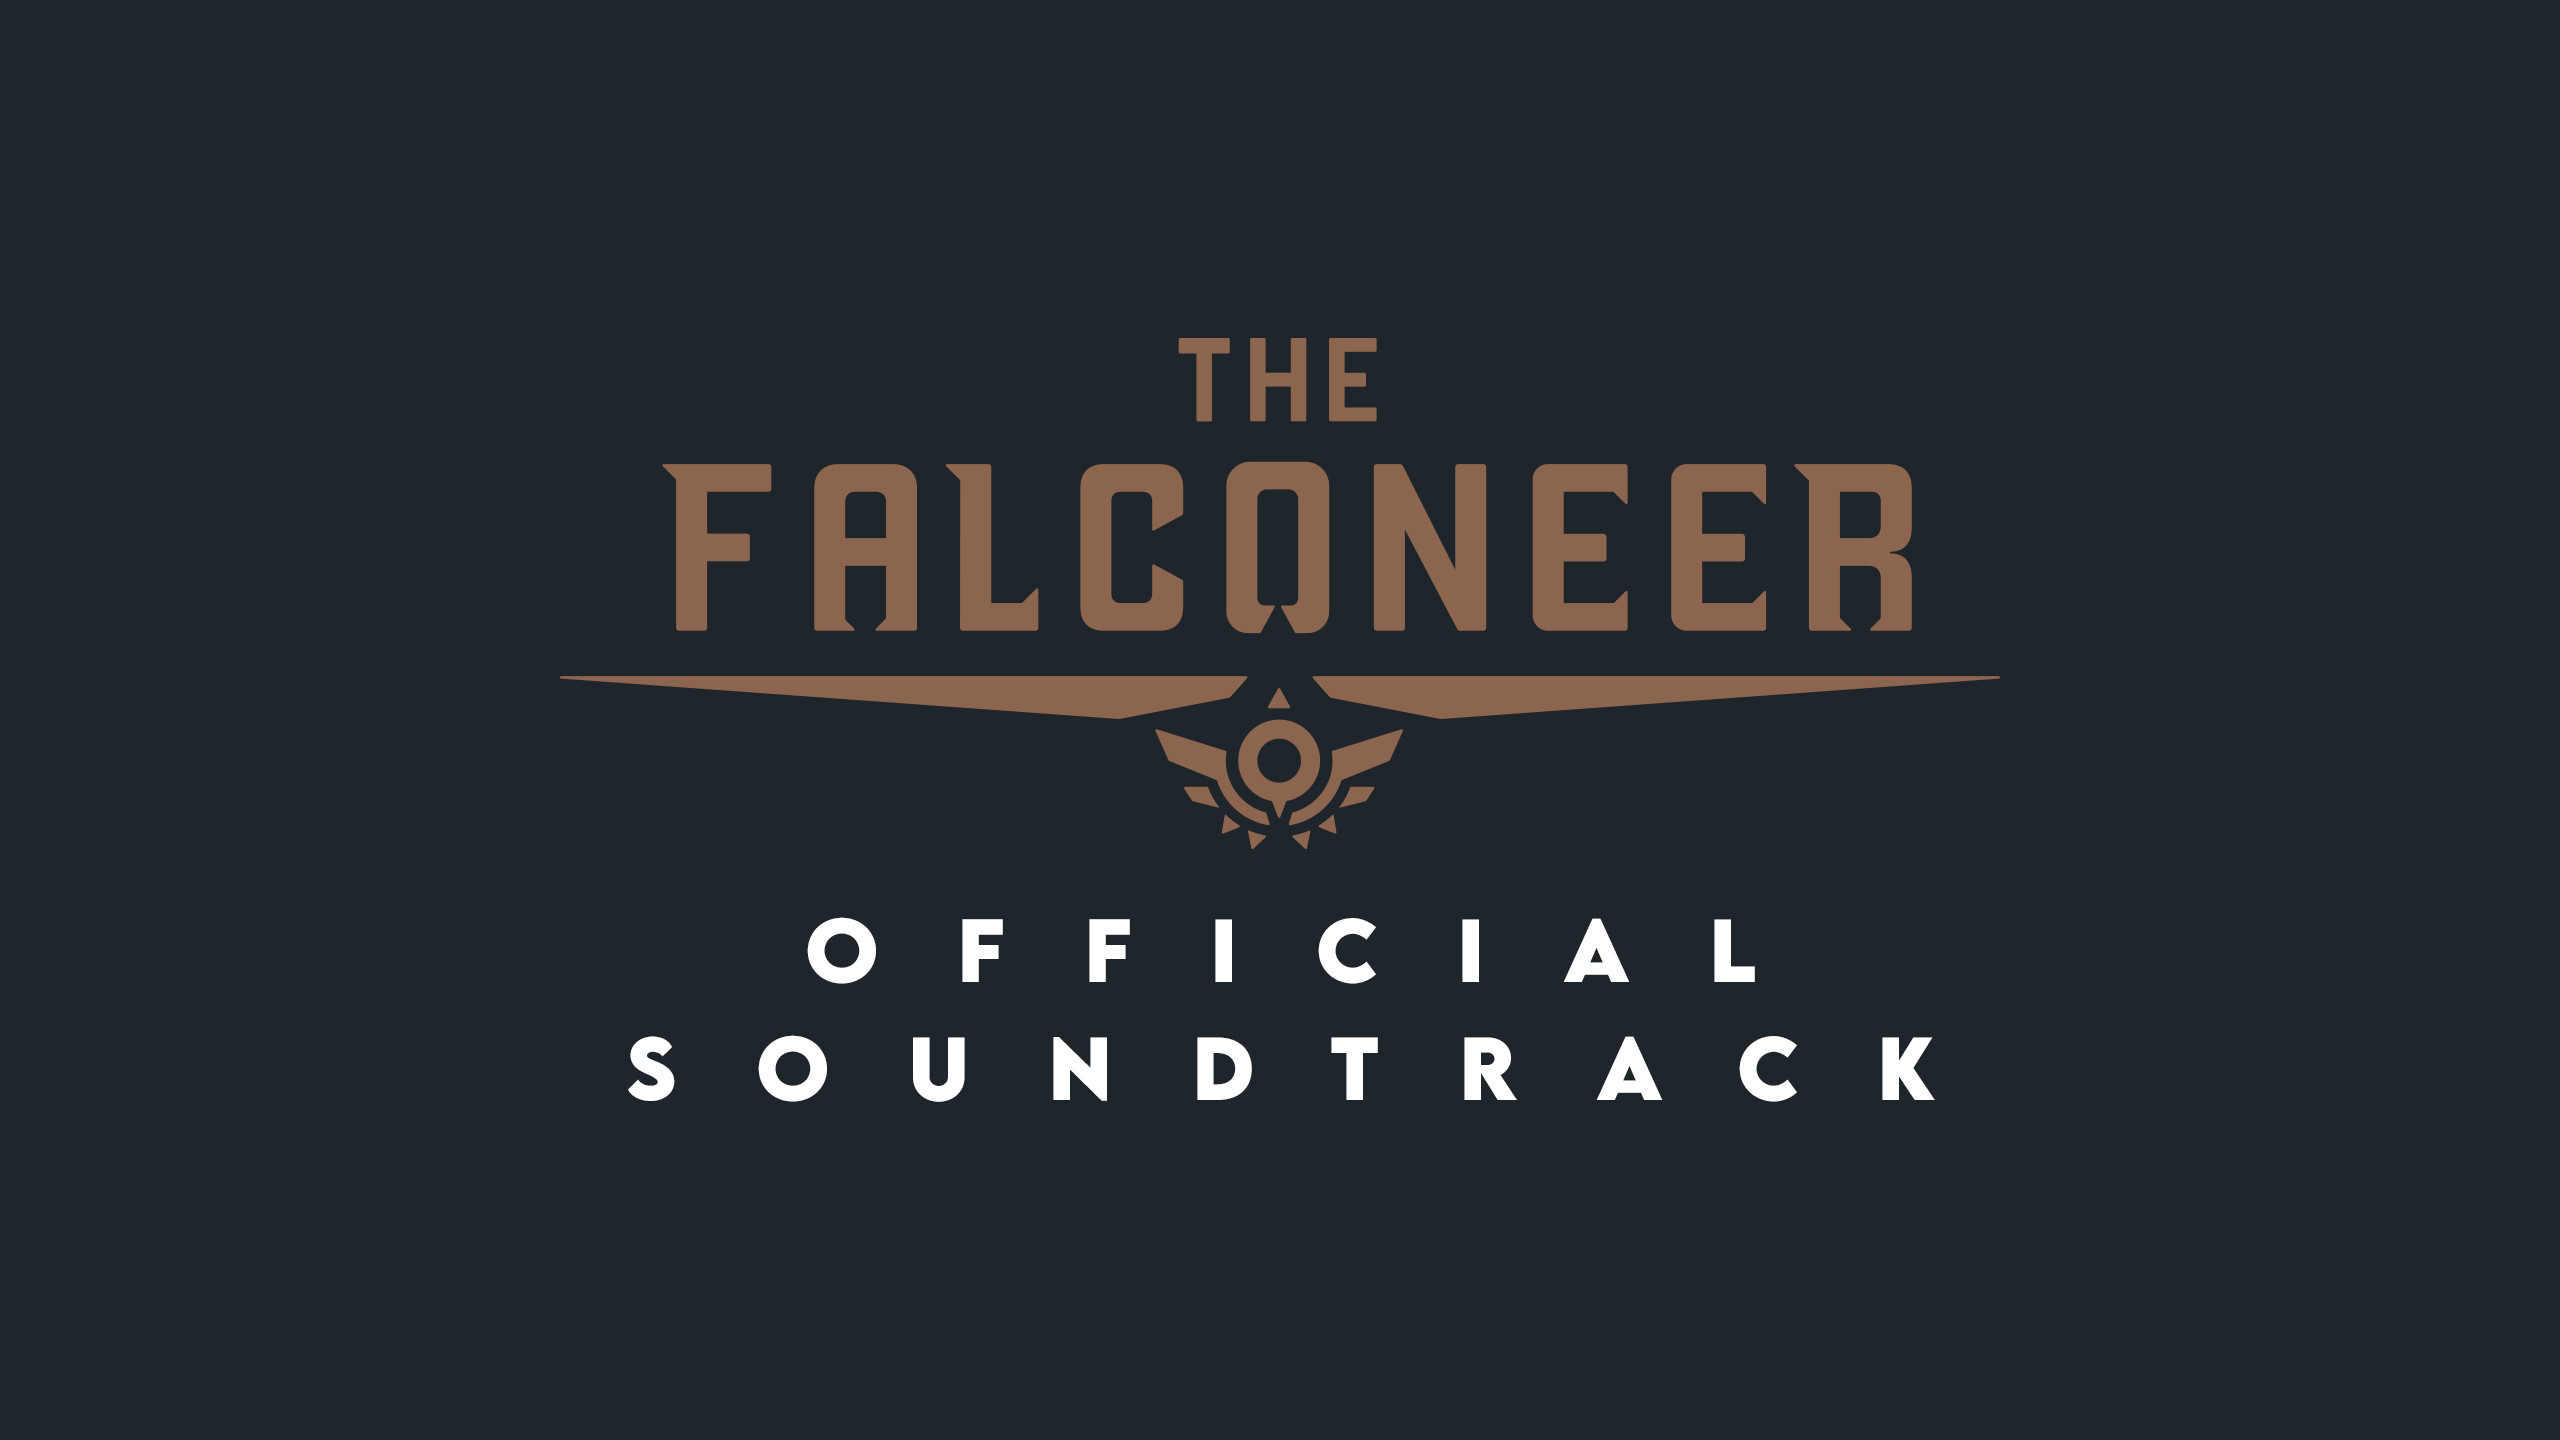 The Falconeer - Official Soundtrack DLC Steam CD Key, $5.64